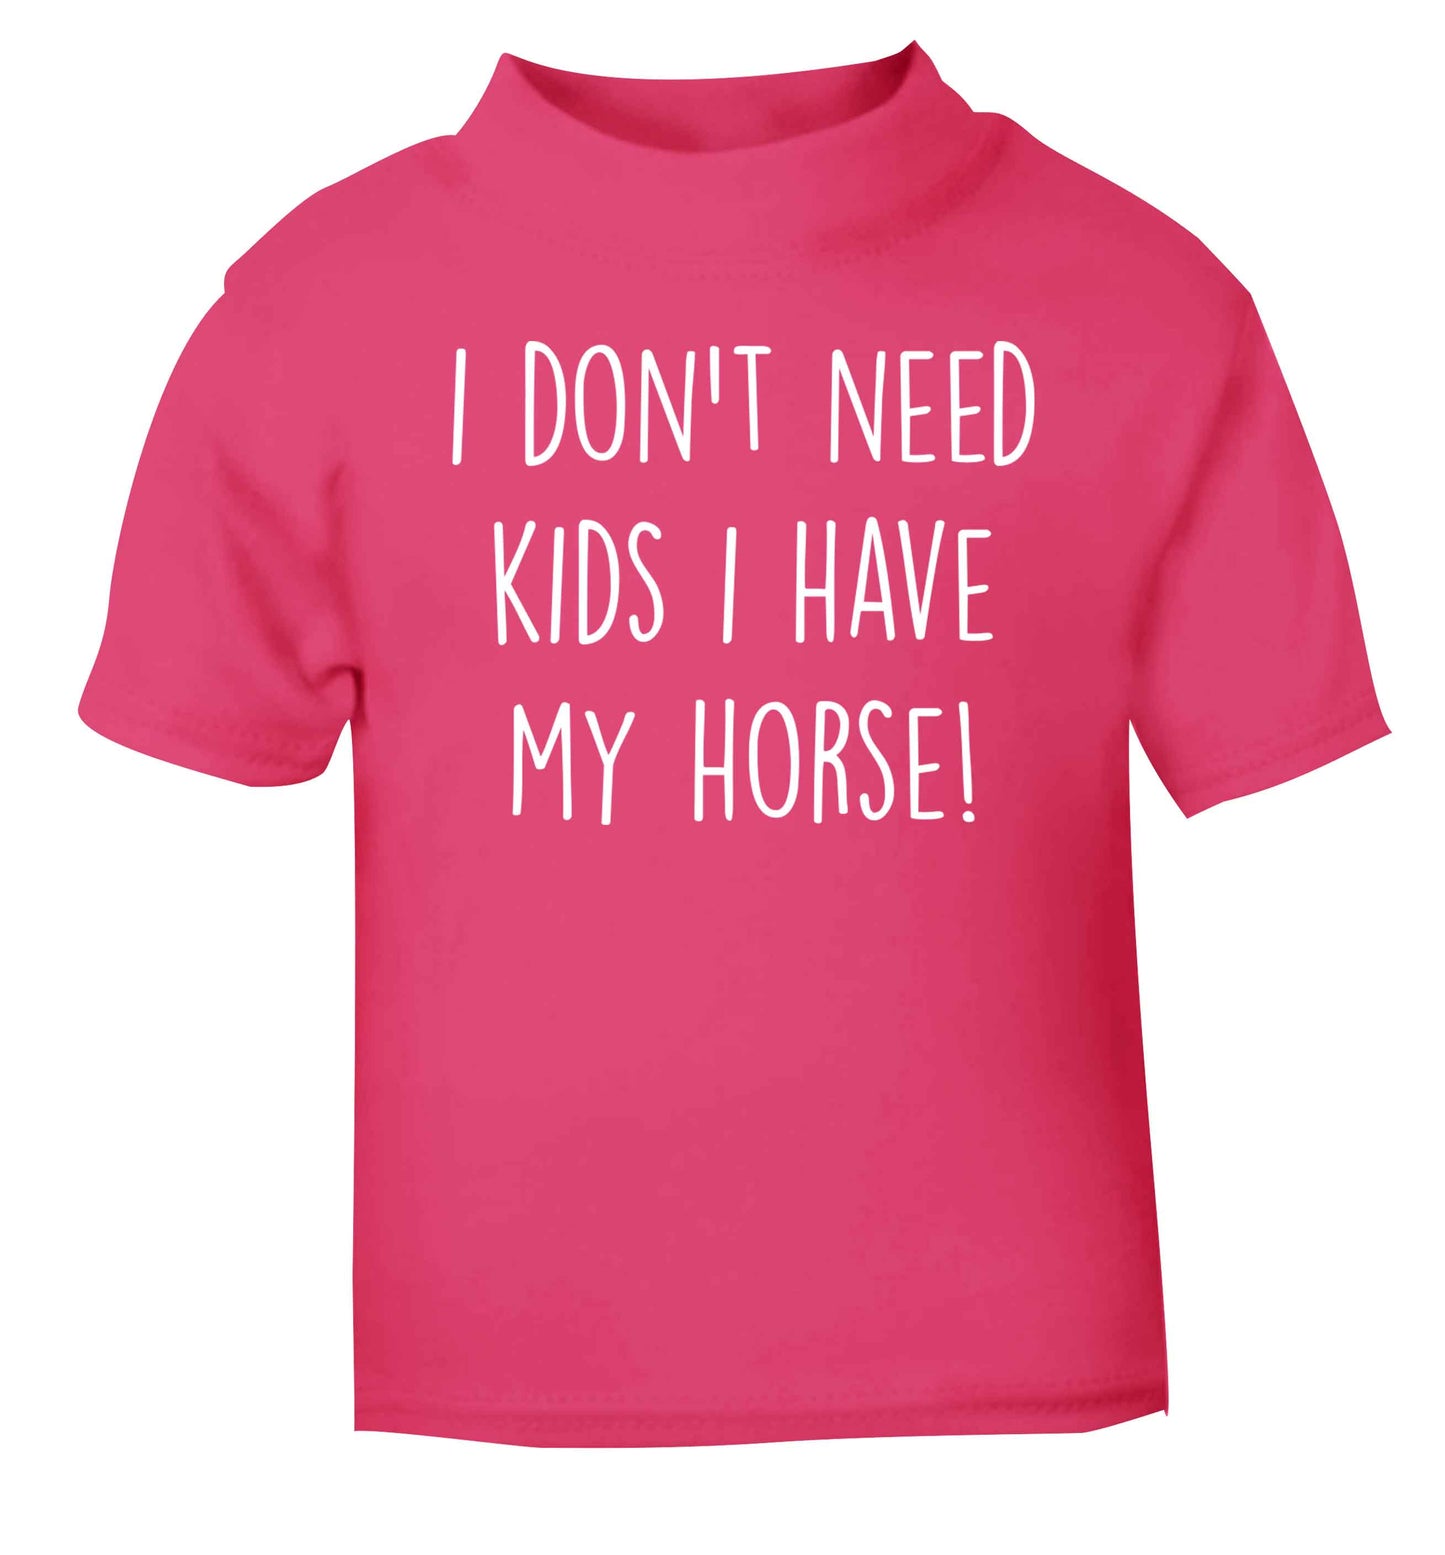 I don't need kids I have my horse pink baby toddler Tshirt 2 Years